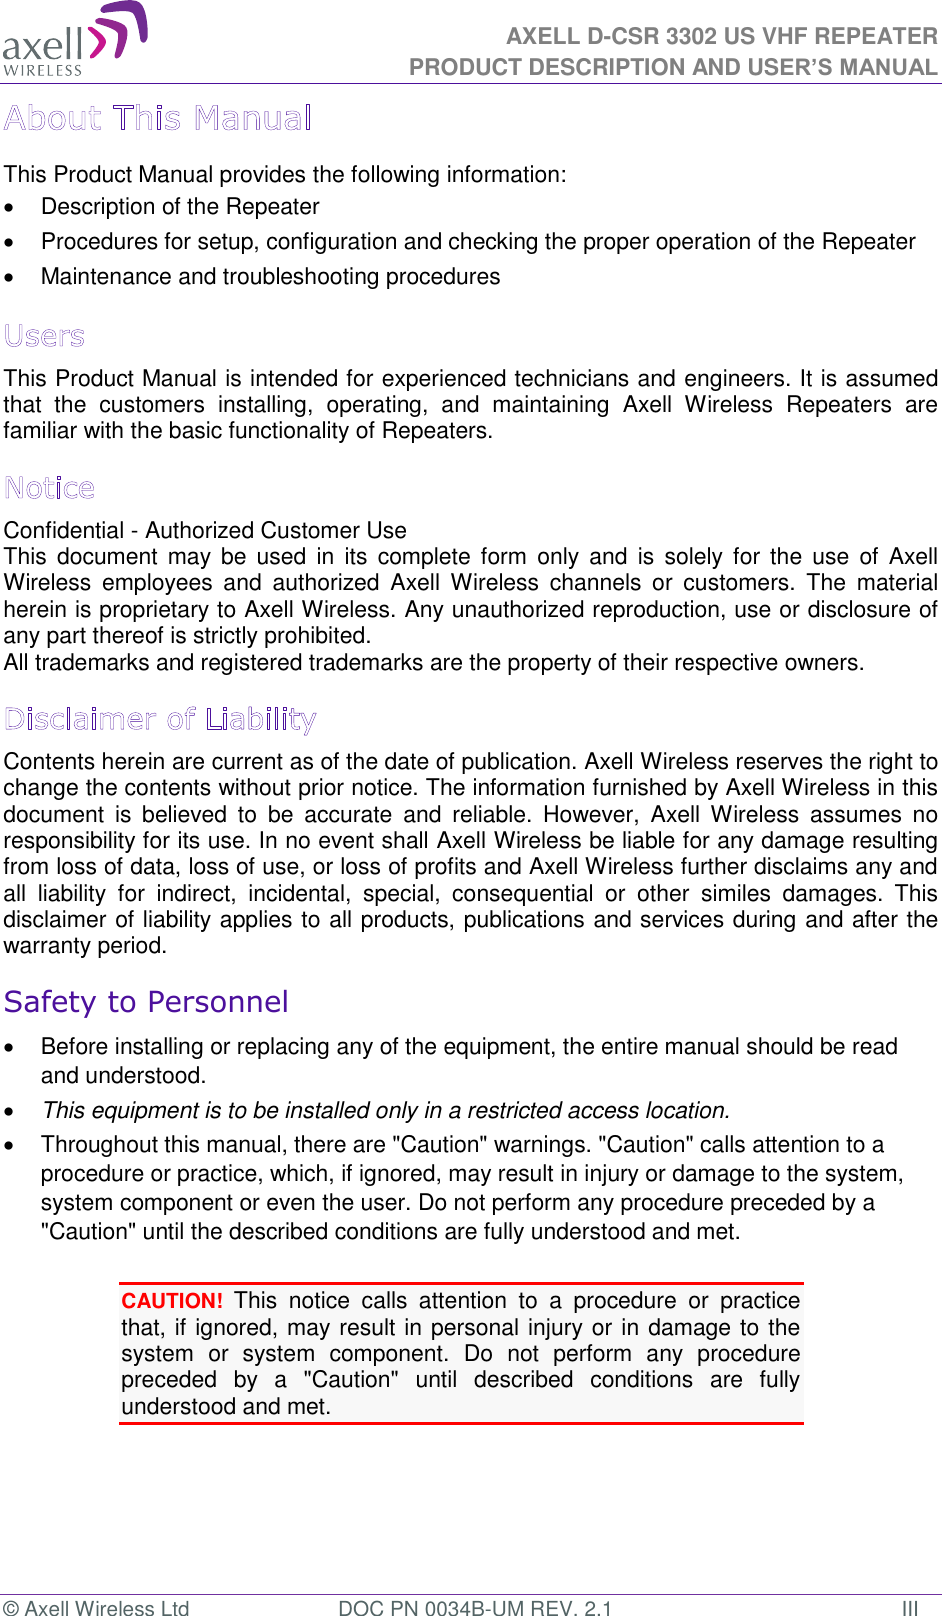 AXELL D-CSR 3302 US VHF REPEATER PRODUCT DESCRIPTION AND USER’S MANUAL © Axell Wireless Ltd  DOC PN 0034B-UM REV. 2.1  III This Product Manual provides the following information:   Description of the Repeater    Procedures for setup, configuration and checking the proper operation of the Repeater    Maintenance and troubleshooting procedures  This Product Manual is intended for experienced technicians and engineers. It is assumed that  the  customers  installing,  operating,  and  maintaining  Axell  Wireless  Repeaters  are familiar with the basic functionality of Repeaters. Confidential - Authorized Customer Use This  document may  be  used  in its complete  form  only  and  is solely  for  the  use  of  Axell Wireless  employees  and  authorized  Axell  Wireless  channels  or  customers.  The  material herein is proprietary to Axell Wireless. Any unauthorized reproduction, use or disclosure of any part thereof is strictly prohibited. All trademarks and registered trademarks are the property of their respective owners. Contents herein are current as of the date of publication. Axell Wireless reserves the right to change the contents without prior notice. The information furnished by Axell Wireless in this document  is  believed  to  be  accurate  and  reliable.  However,  Axell Wireless  assumes  no responsibility for its use. In no event shall Axell Wireless be liable for any damage resulting from loss of data, loss of use, or loss of profits and Axell Wireless further disclaims any and all  liability  for  indirect,  incidental,  special,  consequential  or  other  similes  damages.  This disclaimer of liability applies to all products, publications and services during and after the warranty period. Safety to Personnel   Before installing or replacing any of the equipment, the entire manual should be read and understood.   This equipment is to be installed only in a restricted access location.   Throughout this manual, there are &quot;Caution&quot; warnings. &quot;Caution&quot; calls attention to a procedure or practice, which, if ignored, may result in injury or damage to the system, system component or even the user. Do not perform any procedure preceded by a &quot;Caution&quot; until the described conditions are fully understood and met.  CAUTION! This  notice  calls  attention  to  a  procedure  or  practice that, if ignored, may result in personal injury or in damage to the system  or  system  component.  Do  not  perform  any  procedure preceded  by  a  &quot;Caution&quot;  until  described  conditions  are  fully understood and met.   